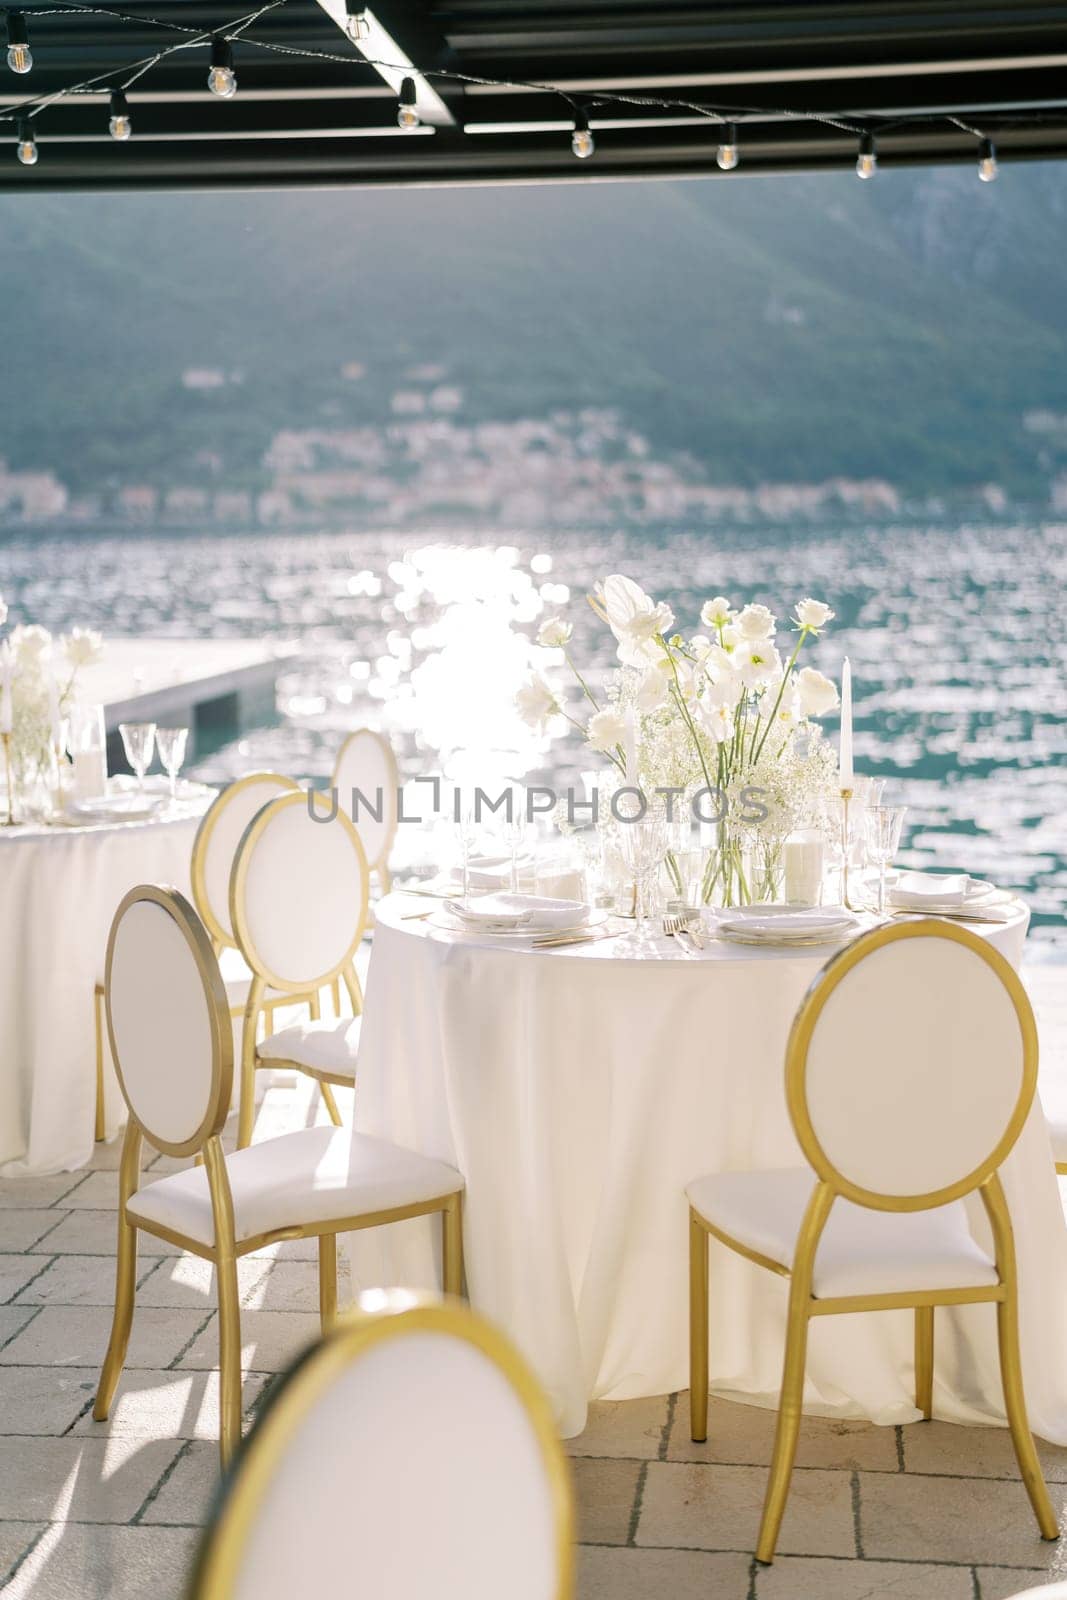 White chairs stand around round festive tables with bouquets of flowers under a cover on the pier. High quality photo